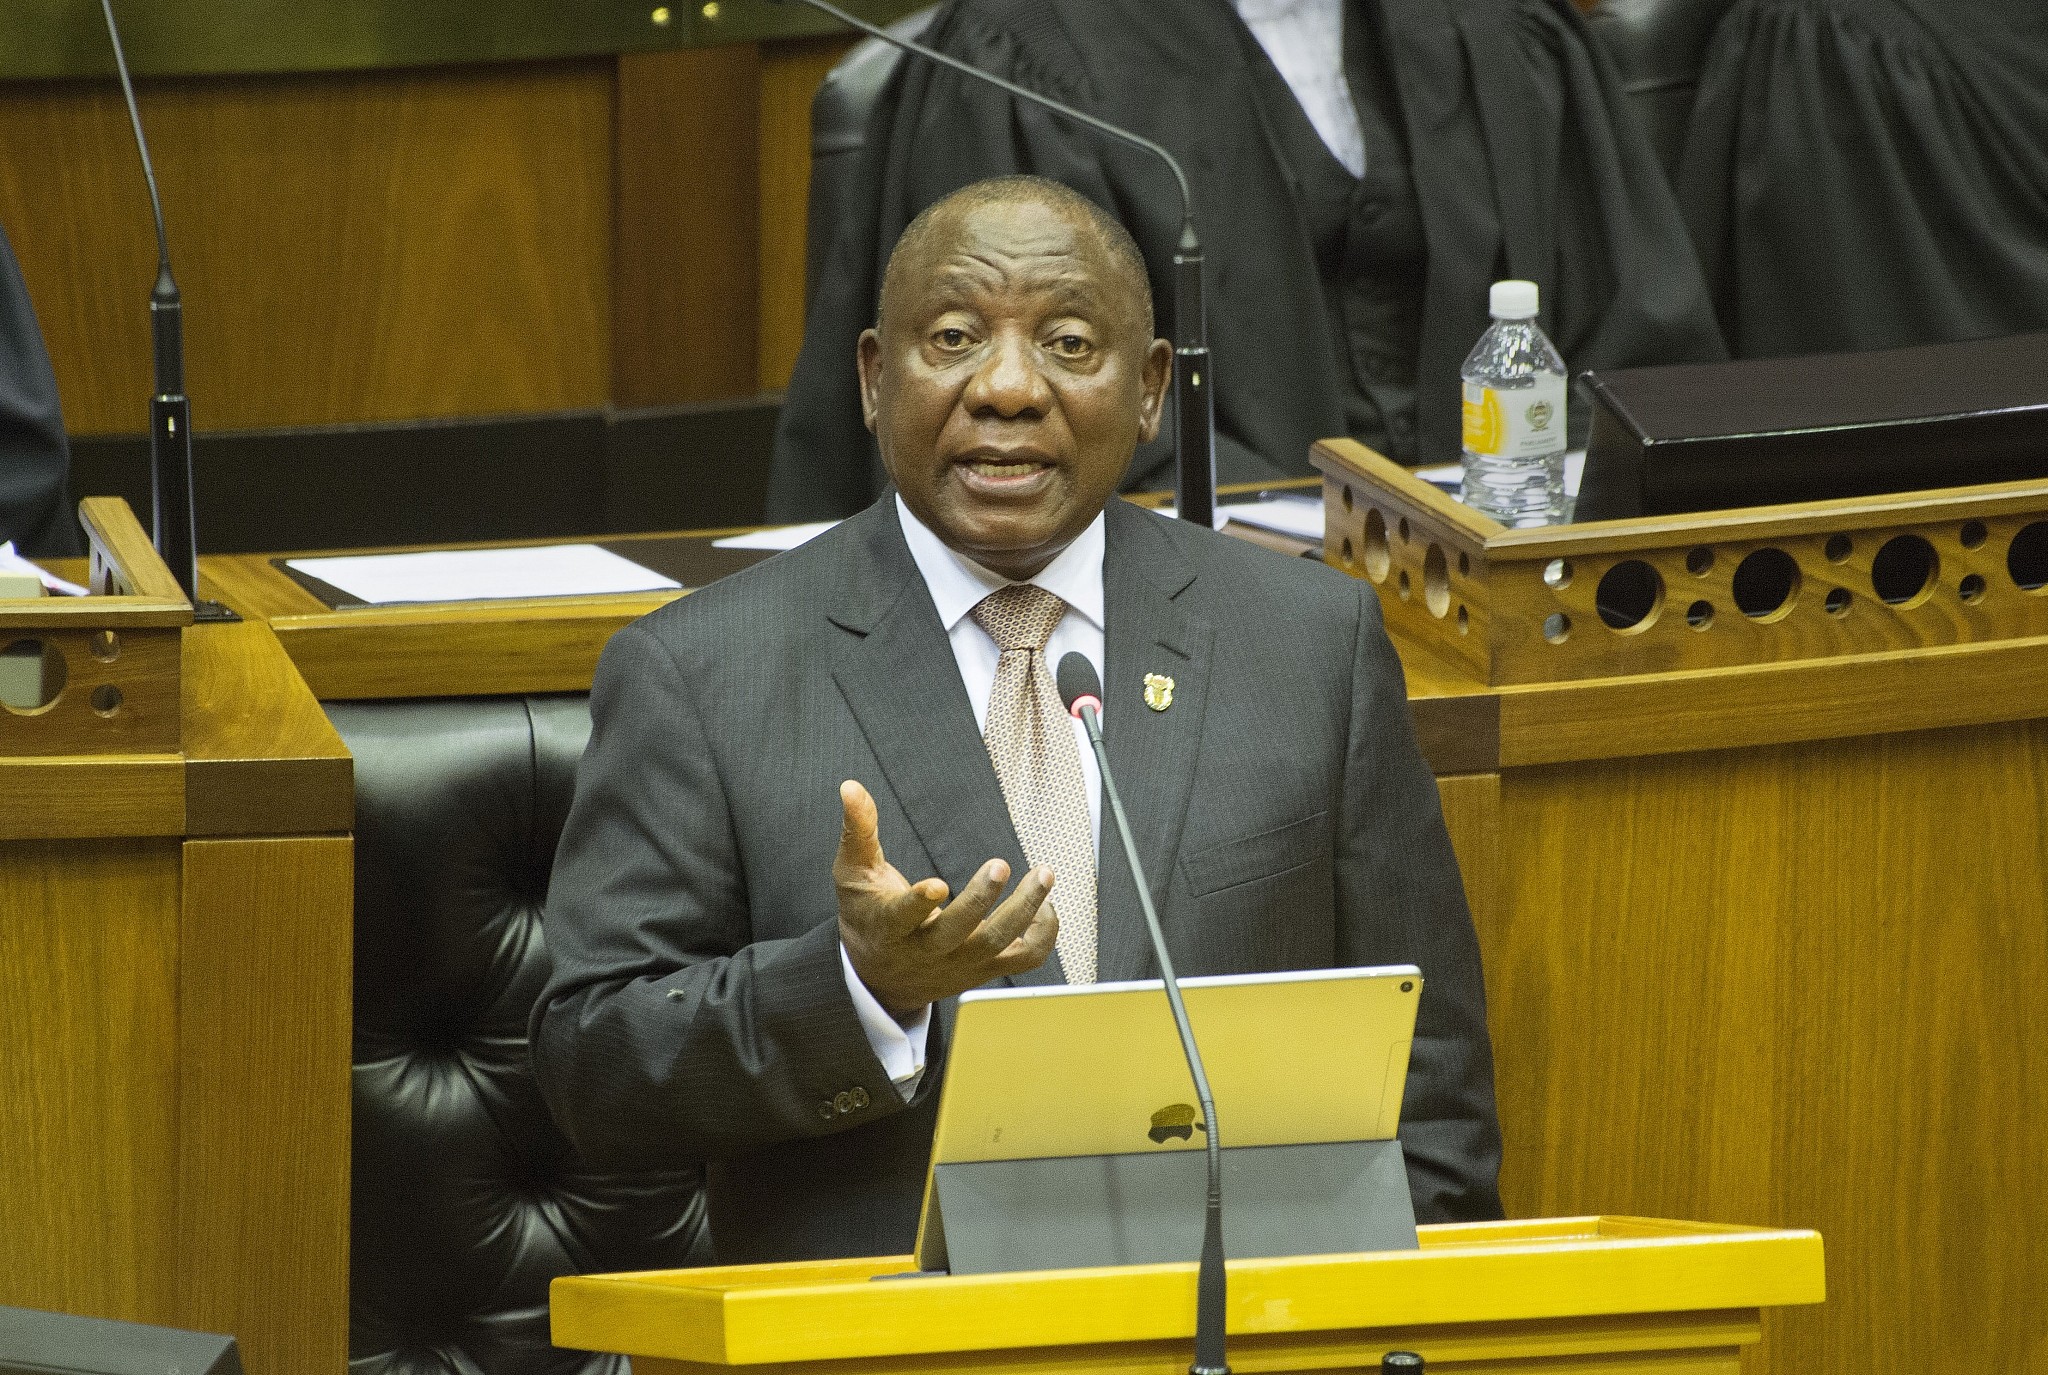 South Africa In The Process Of Downgrading Israel Embassy President Says The Times Of Israel